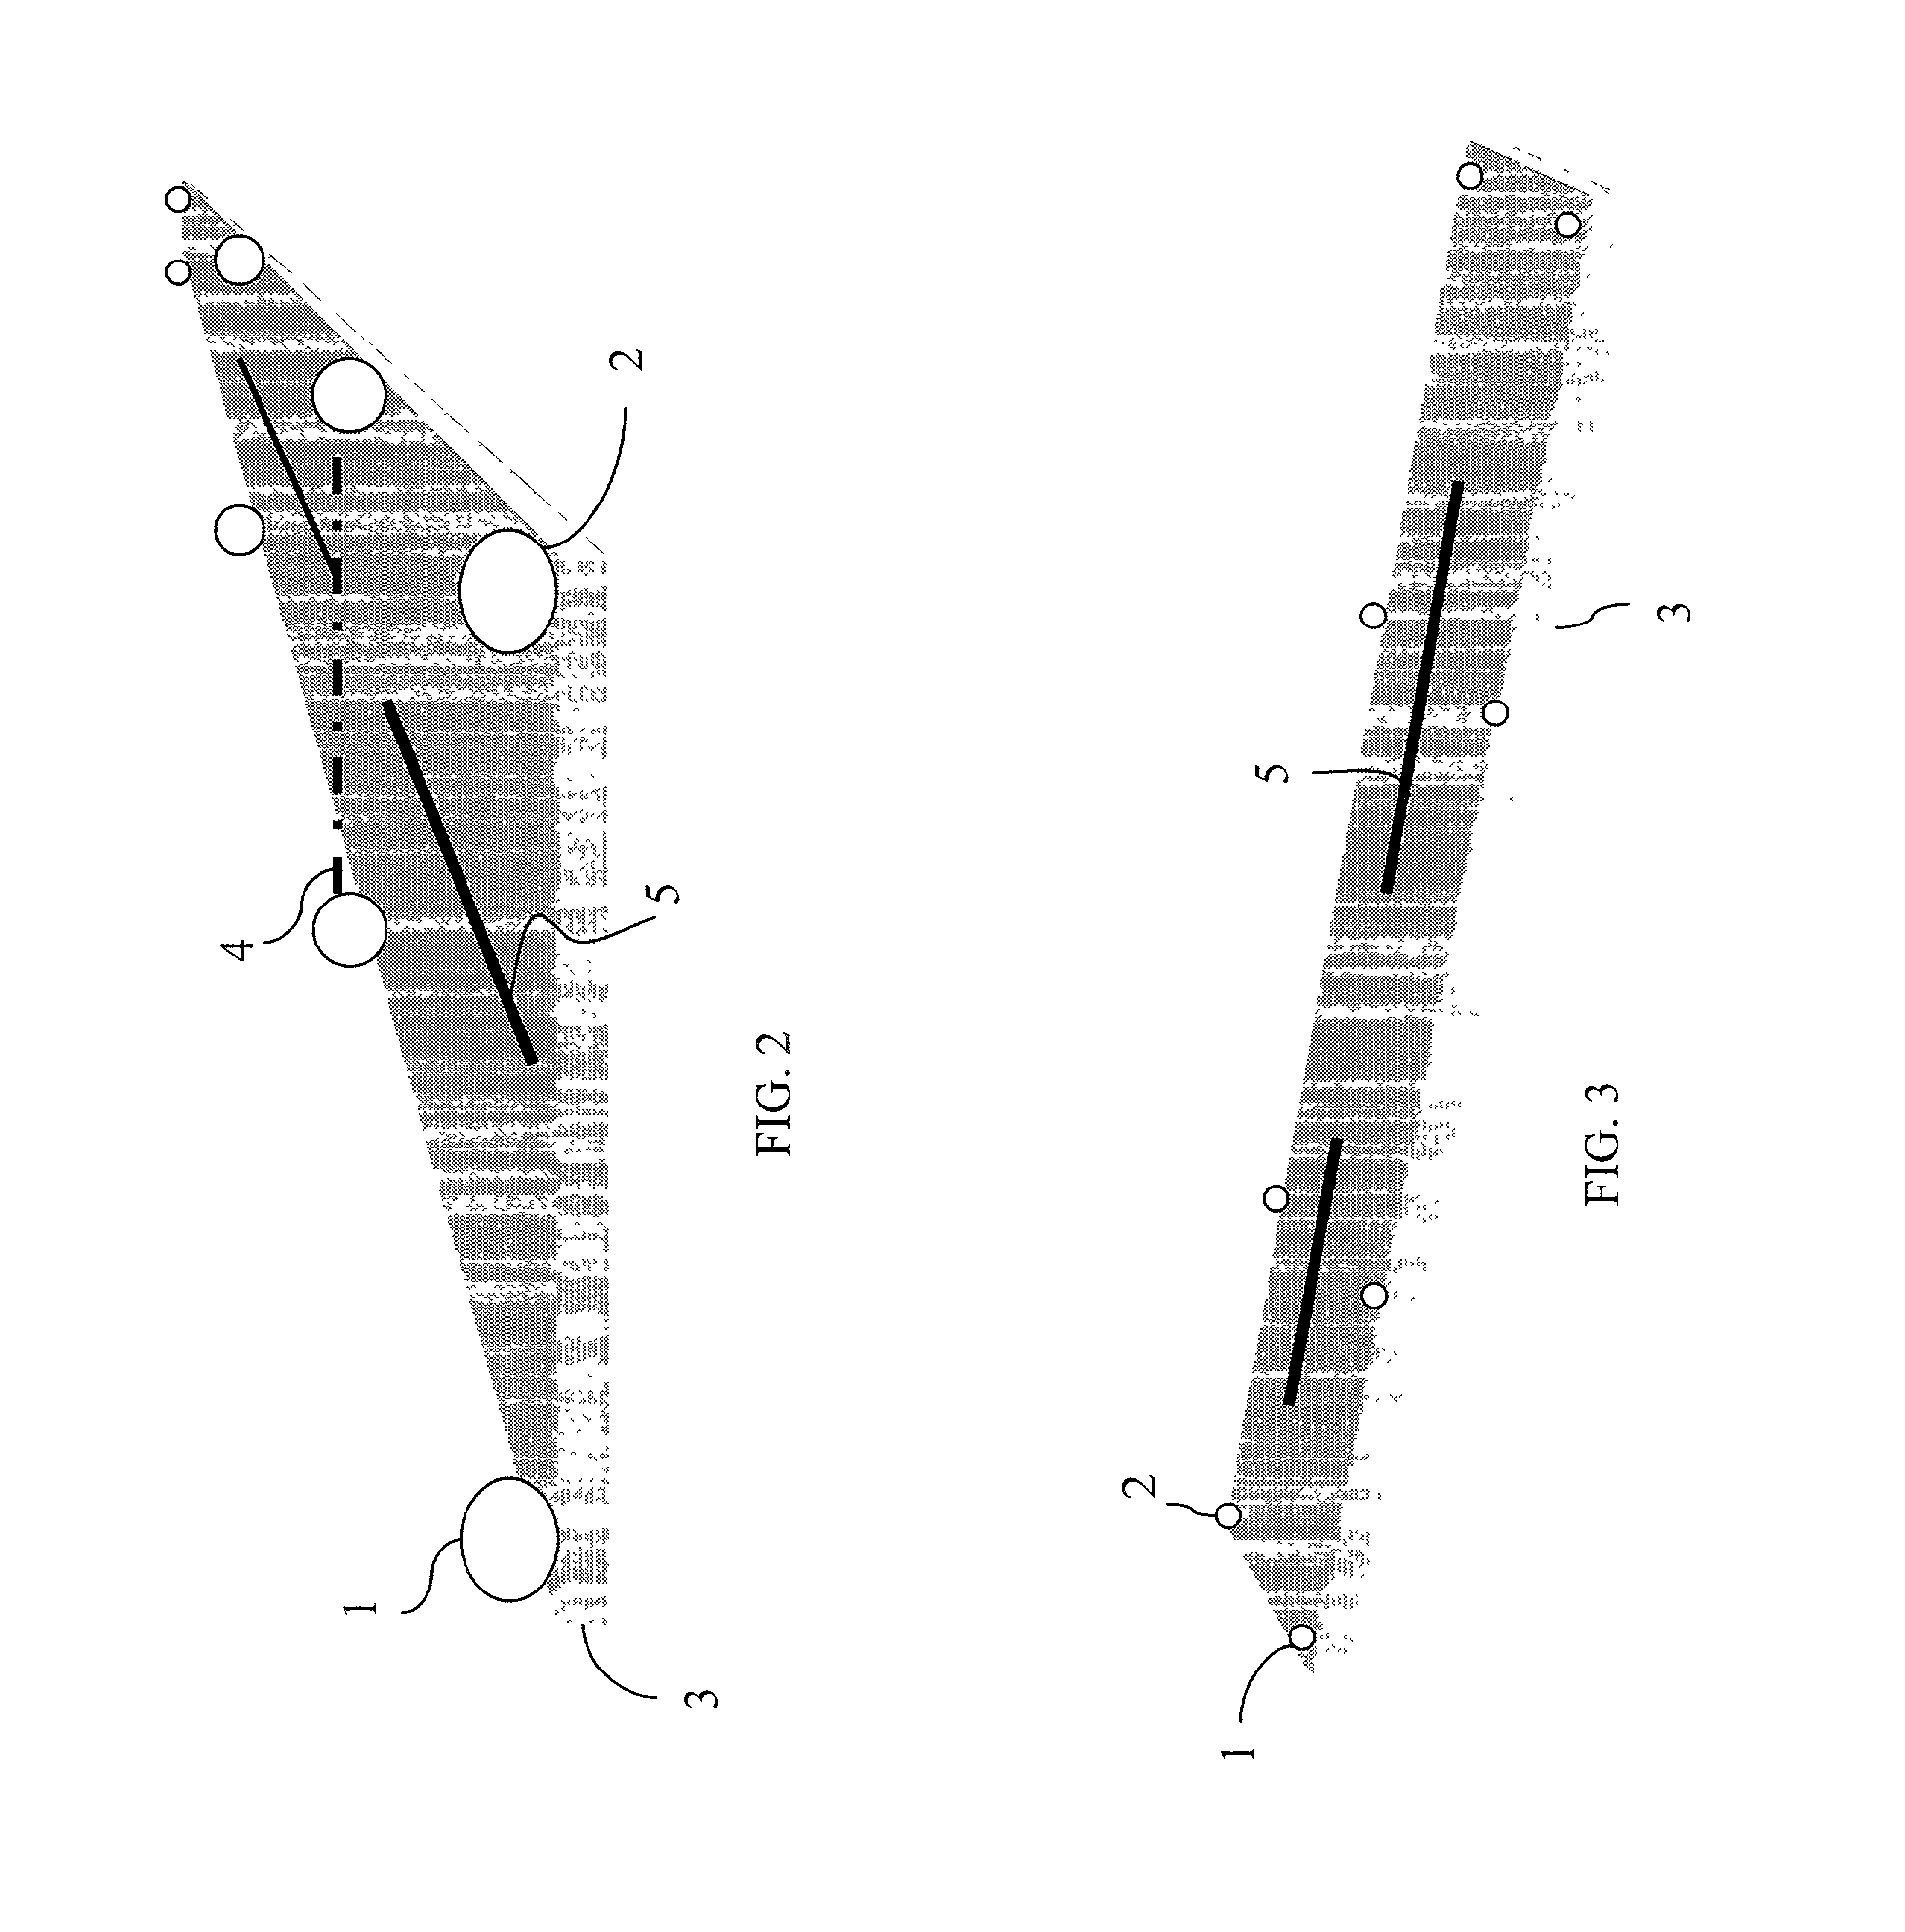 Apparatus and method for detecting objects located on an airport runway